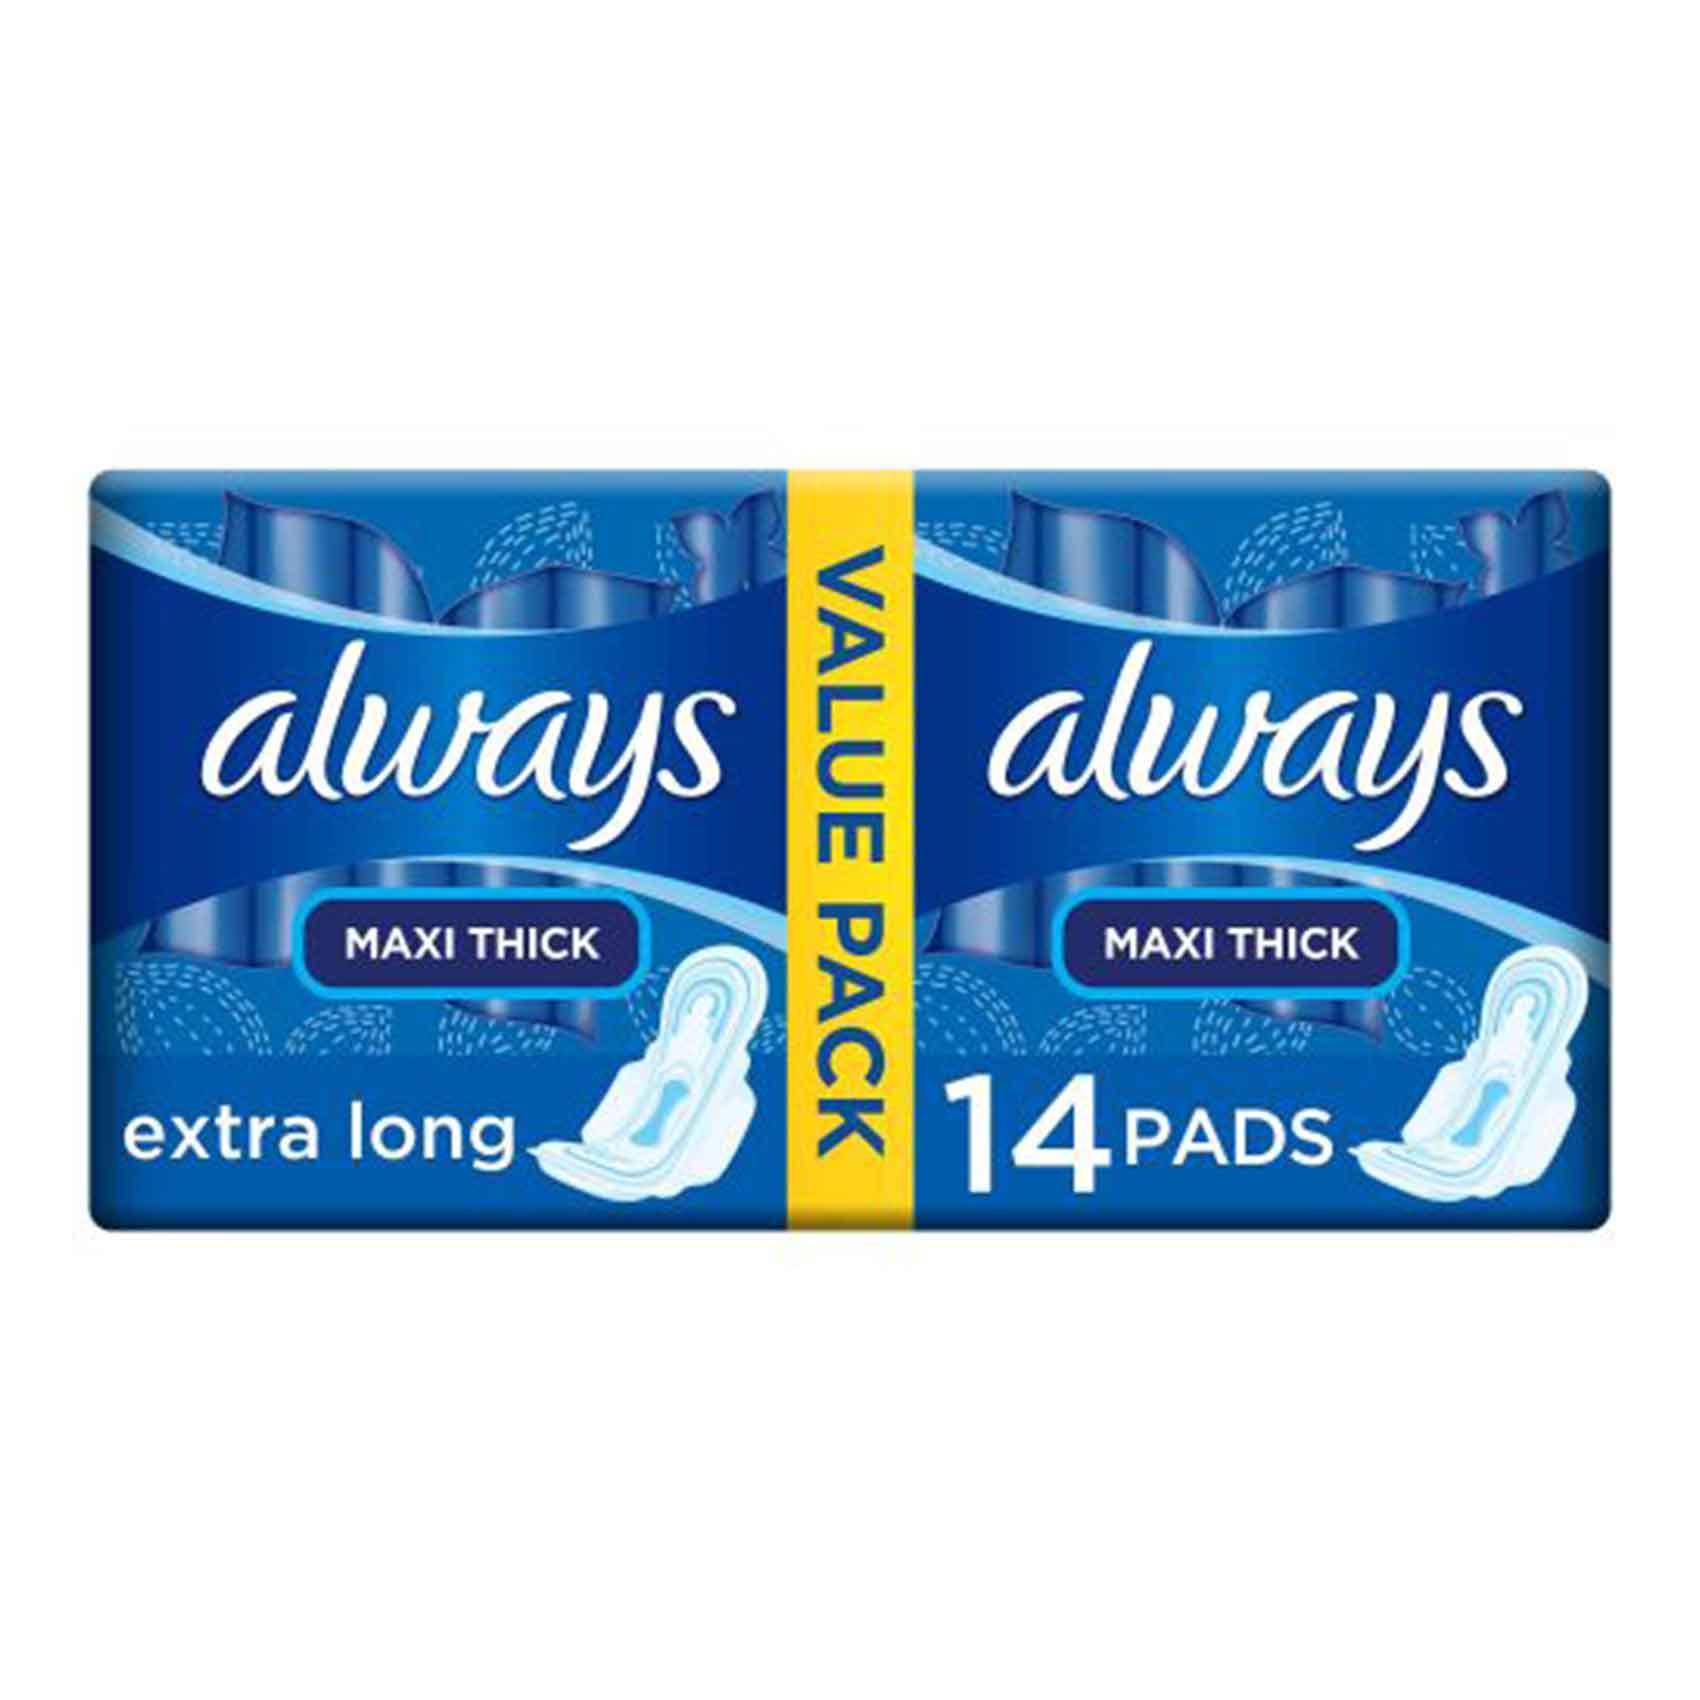 Always Maxi Thick E/Long Duo 14Pads